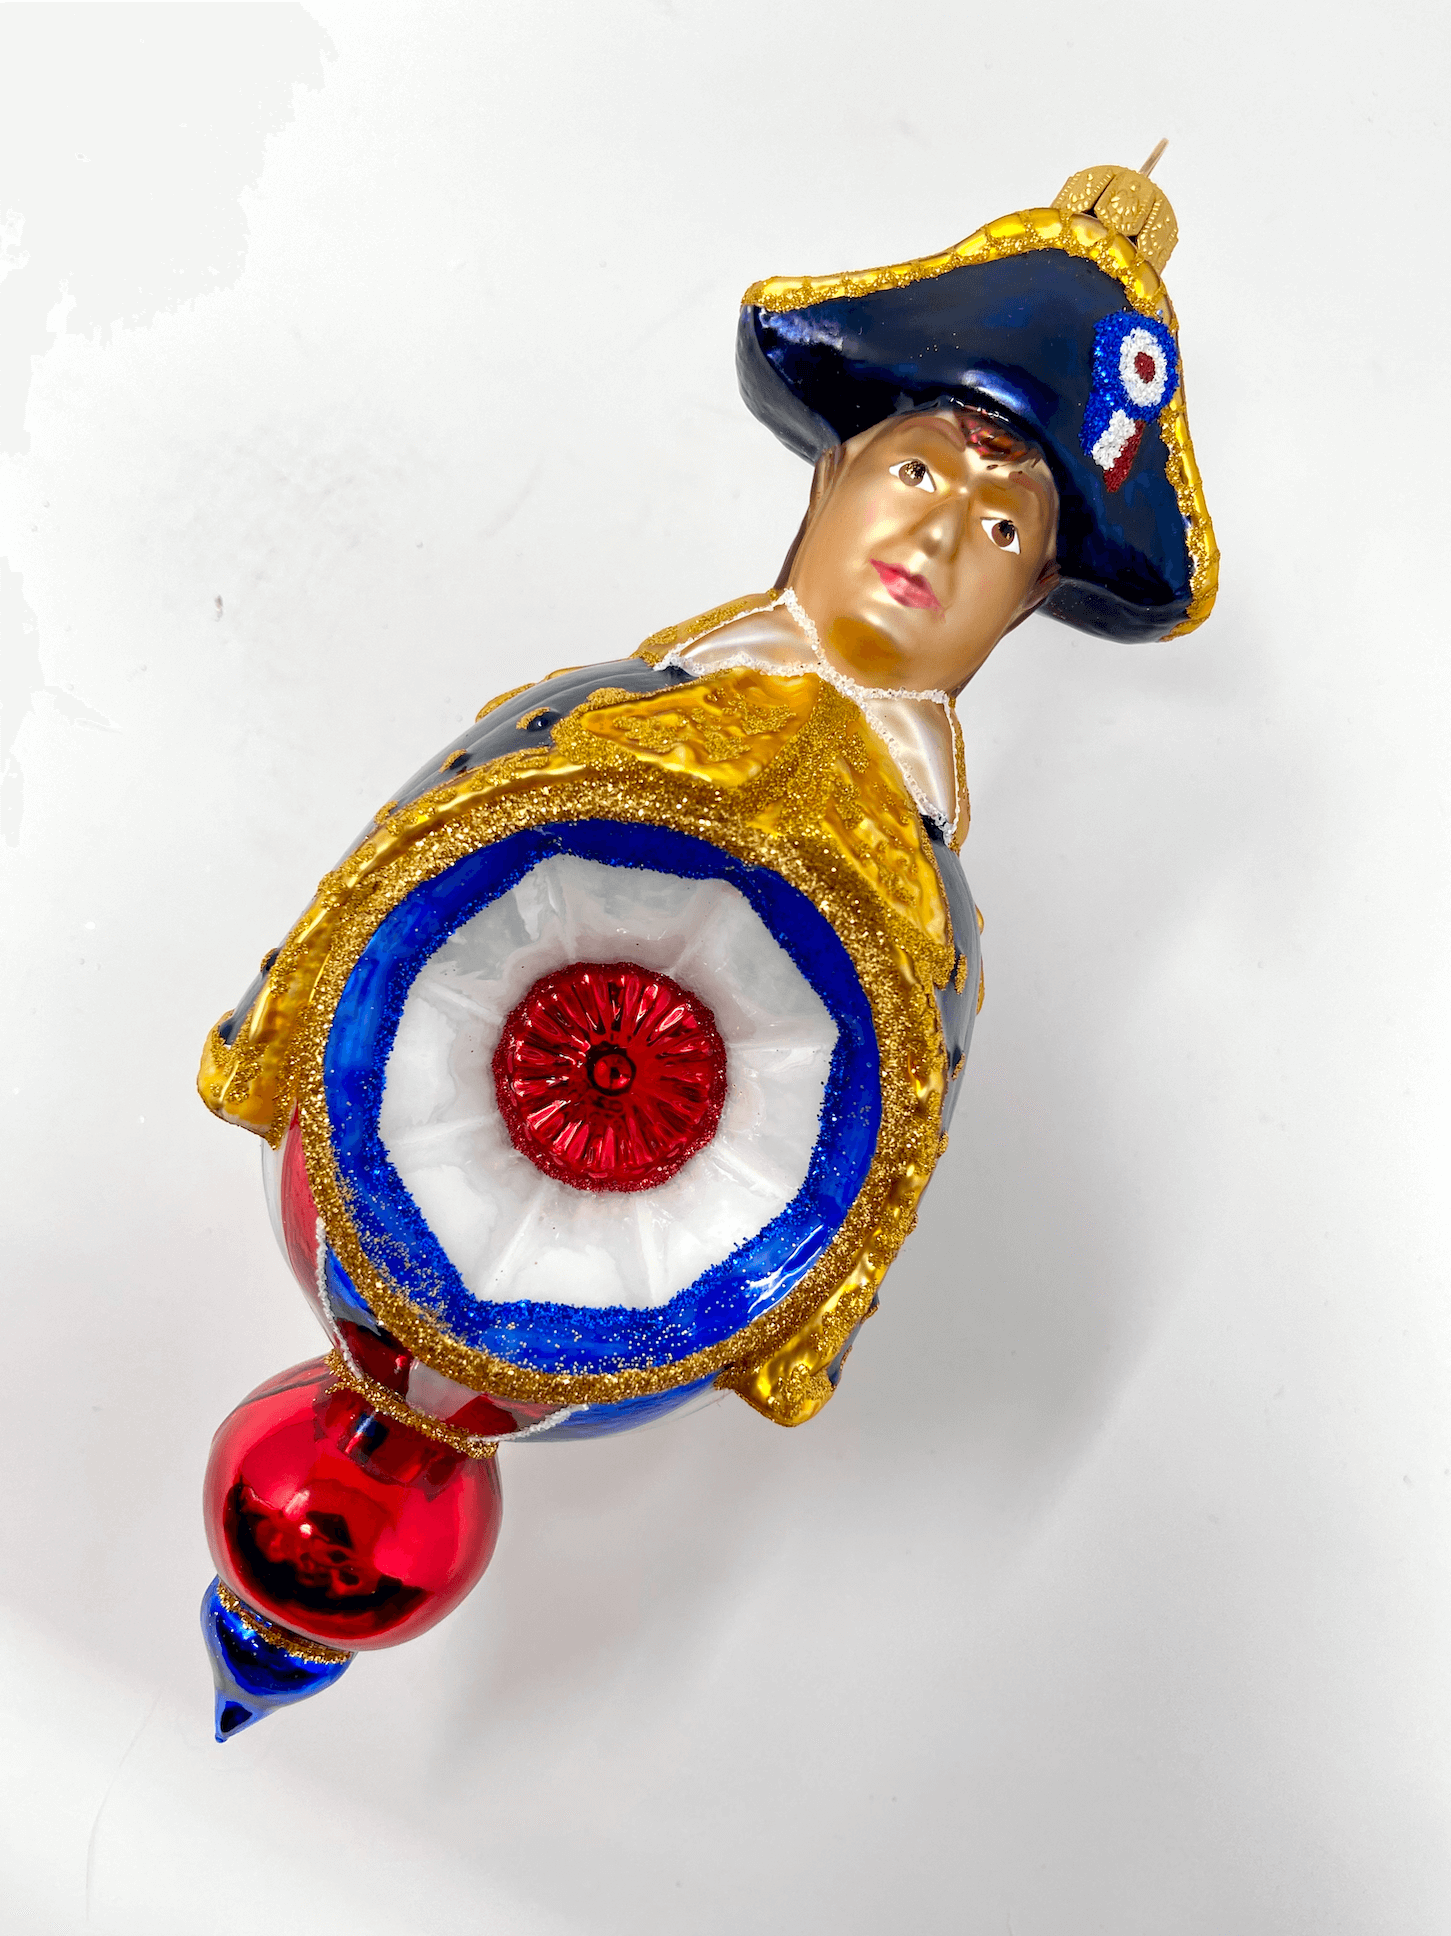 Beautiful Napoleon Bonaparte reflector ornament wearing a black cloak and colonial hat with red white and blue patriotic detailing. Polish glass christmas ornaments in saturated colors.